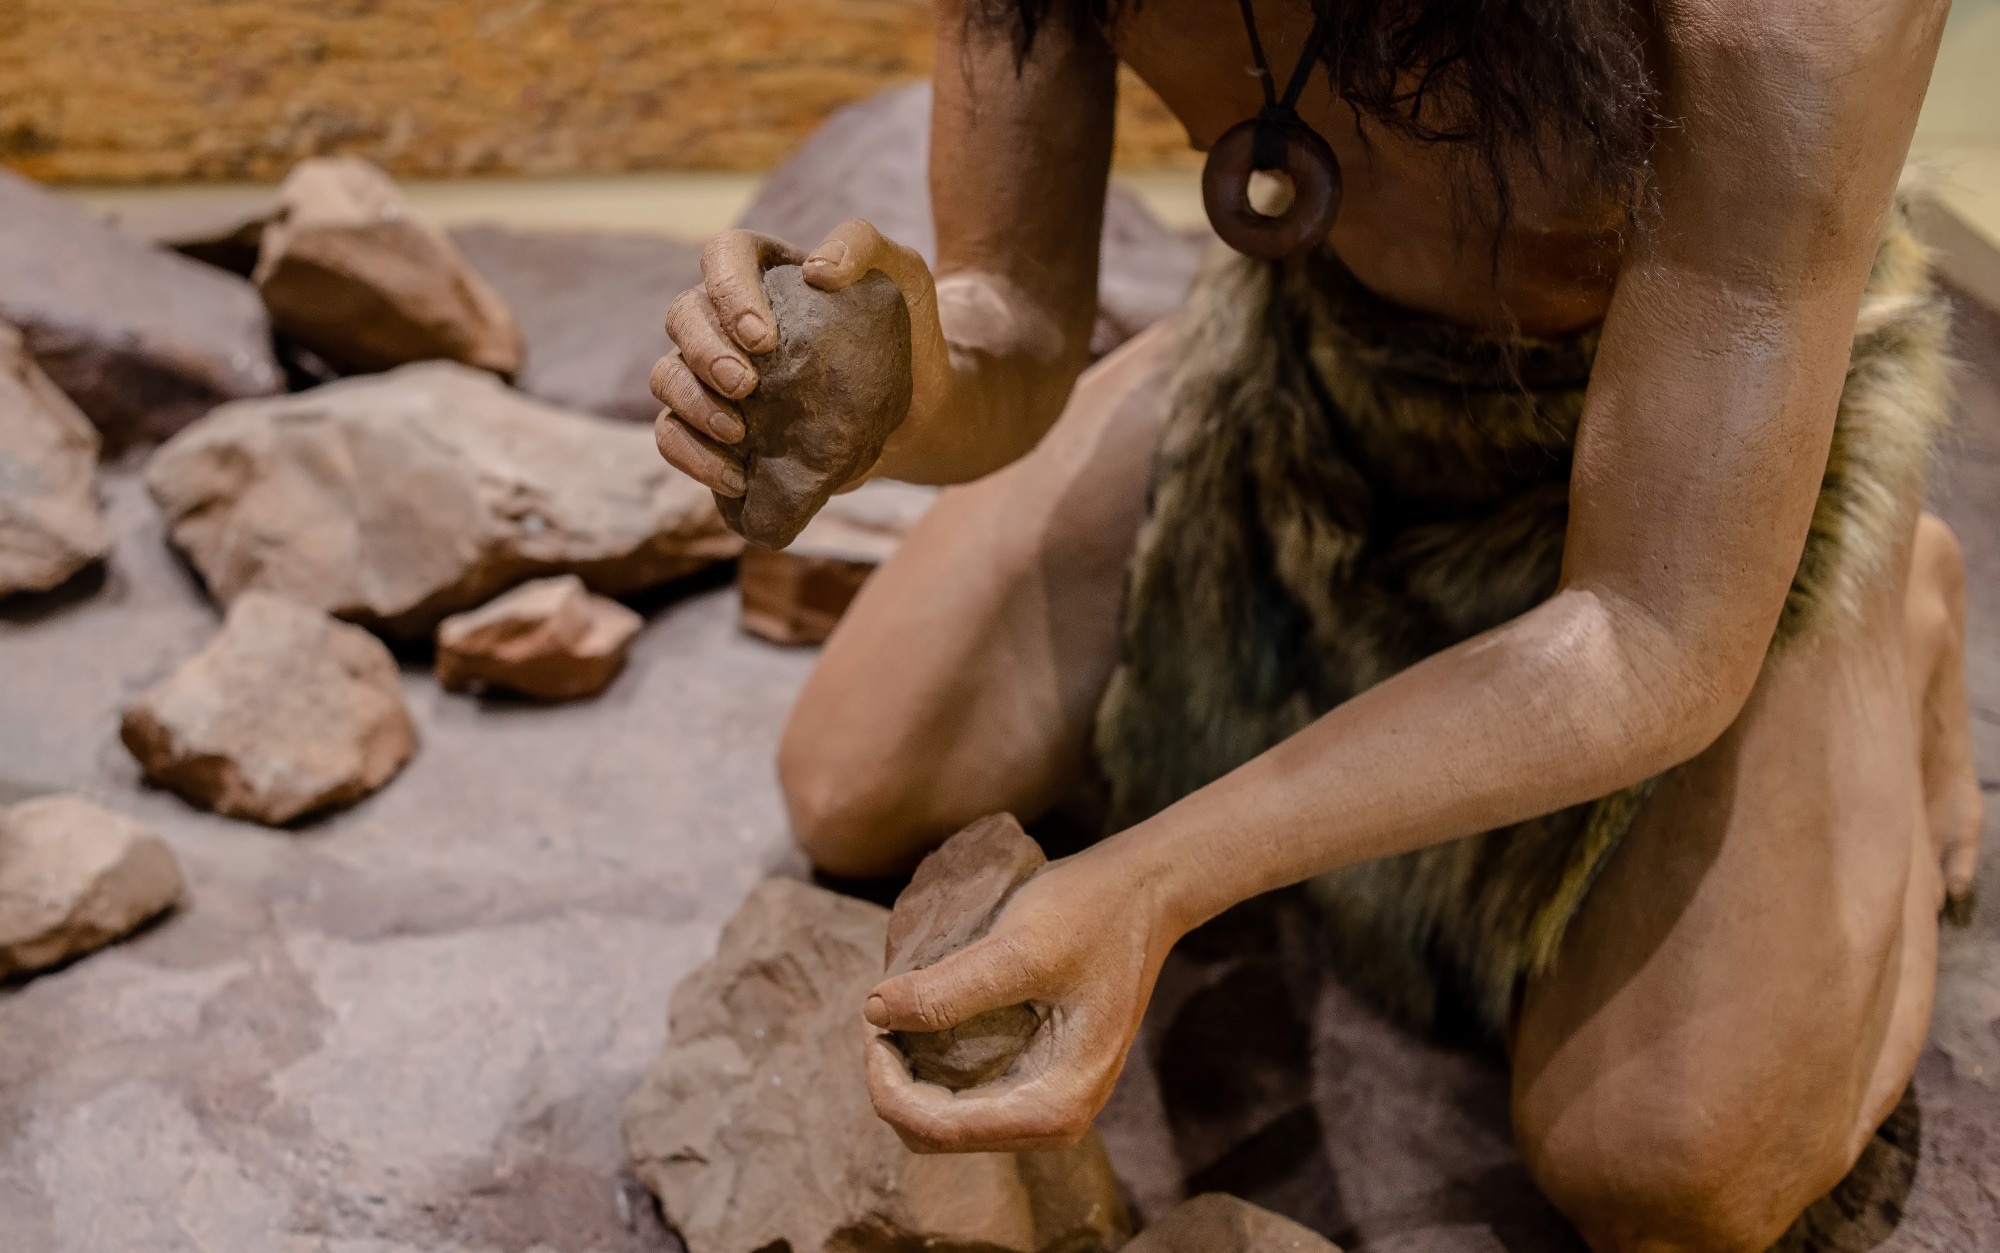 Study: Neanderthal introgression in SCN9A impacts mechanical pain sensitivity. Image Credit: I AM JIFFY / Shutterstock